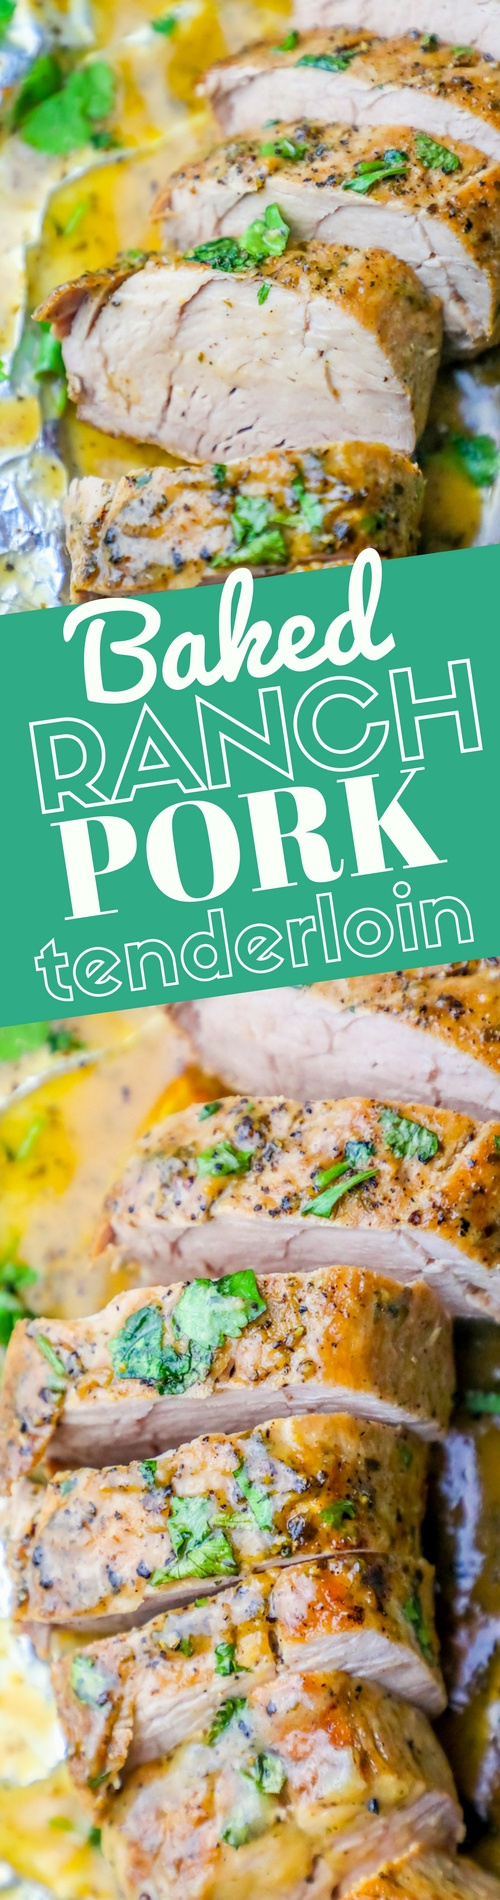 picture of pork tenderloin with cilantro on it and butter in tin foil up close with Baked Ranch Pork Tenderloin written on it. 